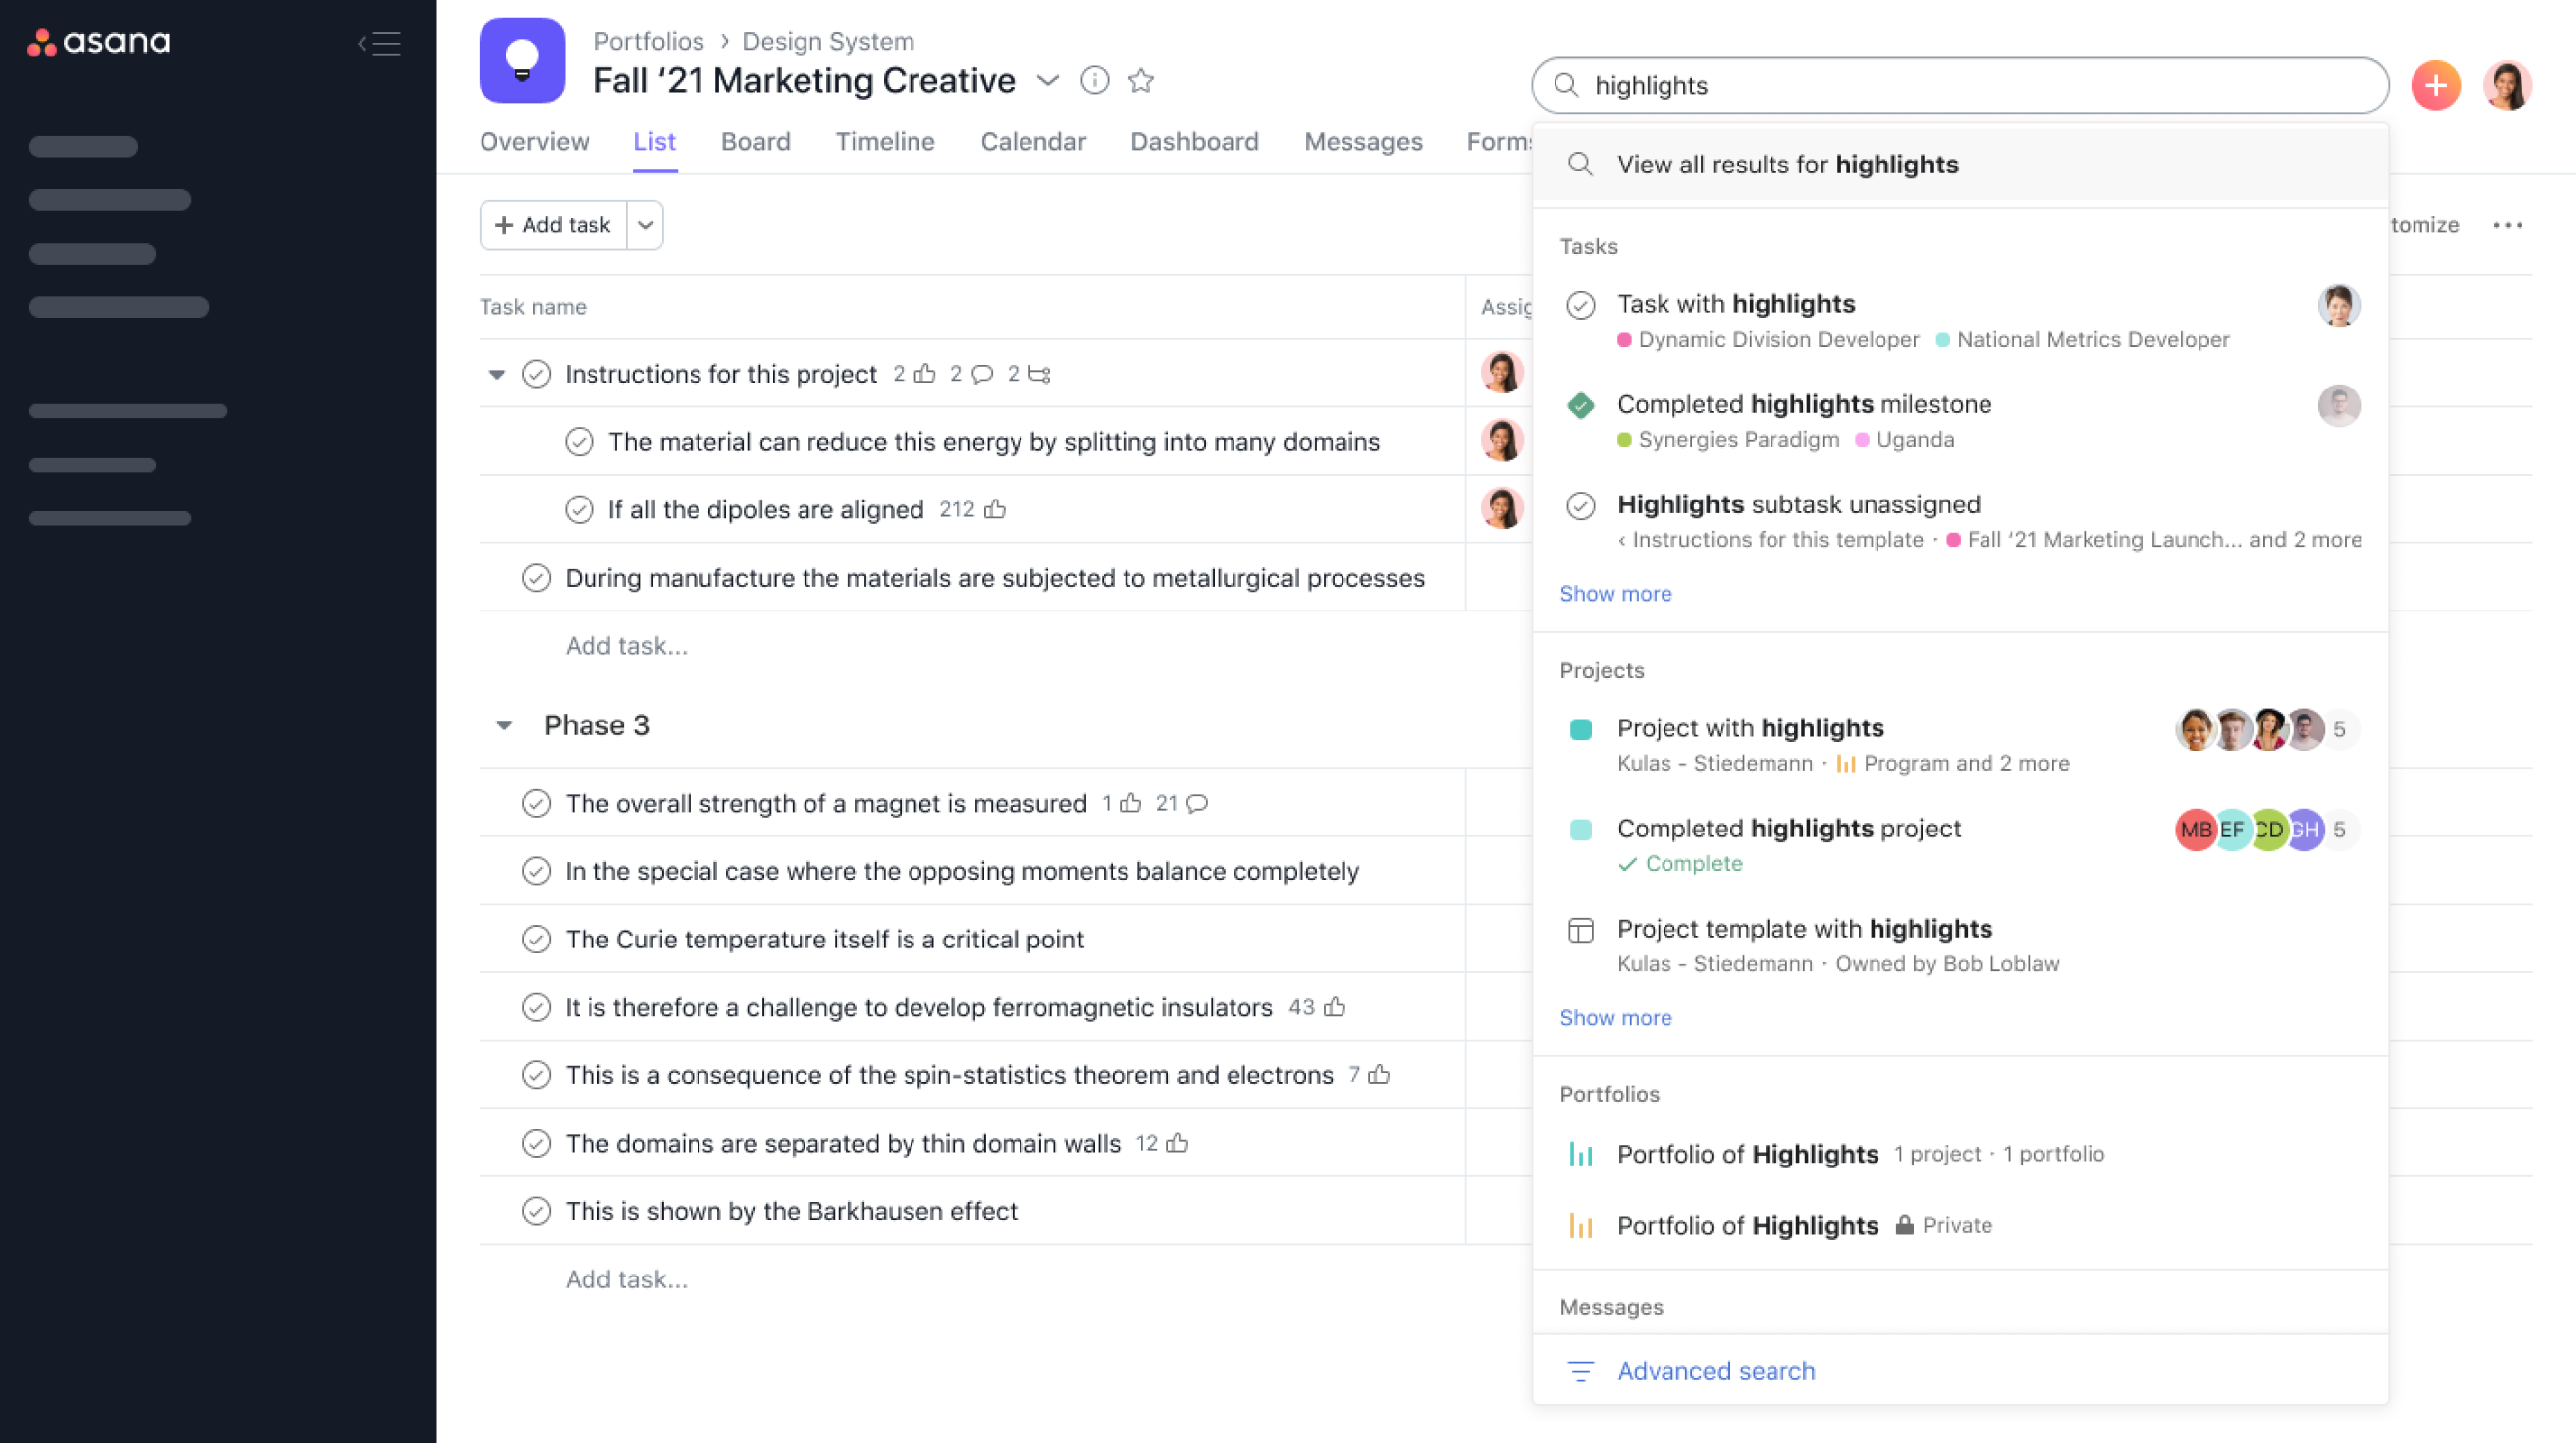 Use search in the top bar to find any people, conversations, or work you’ve tracked in Asana